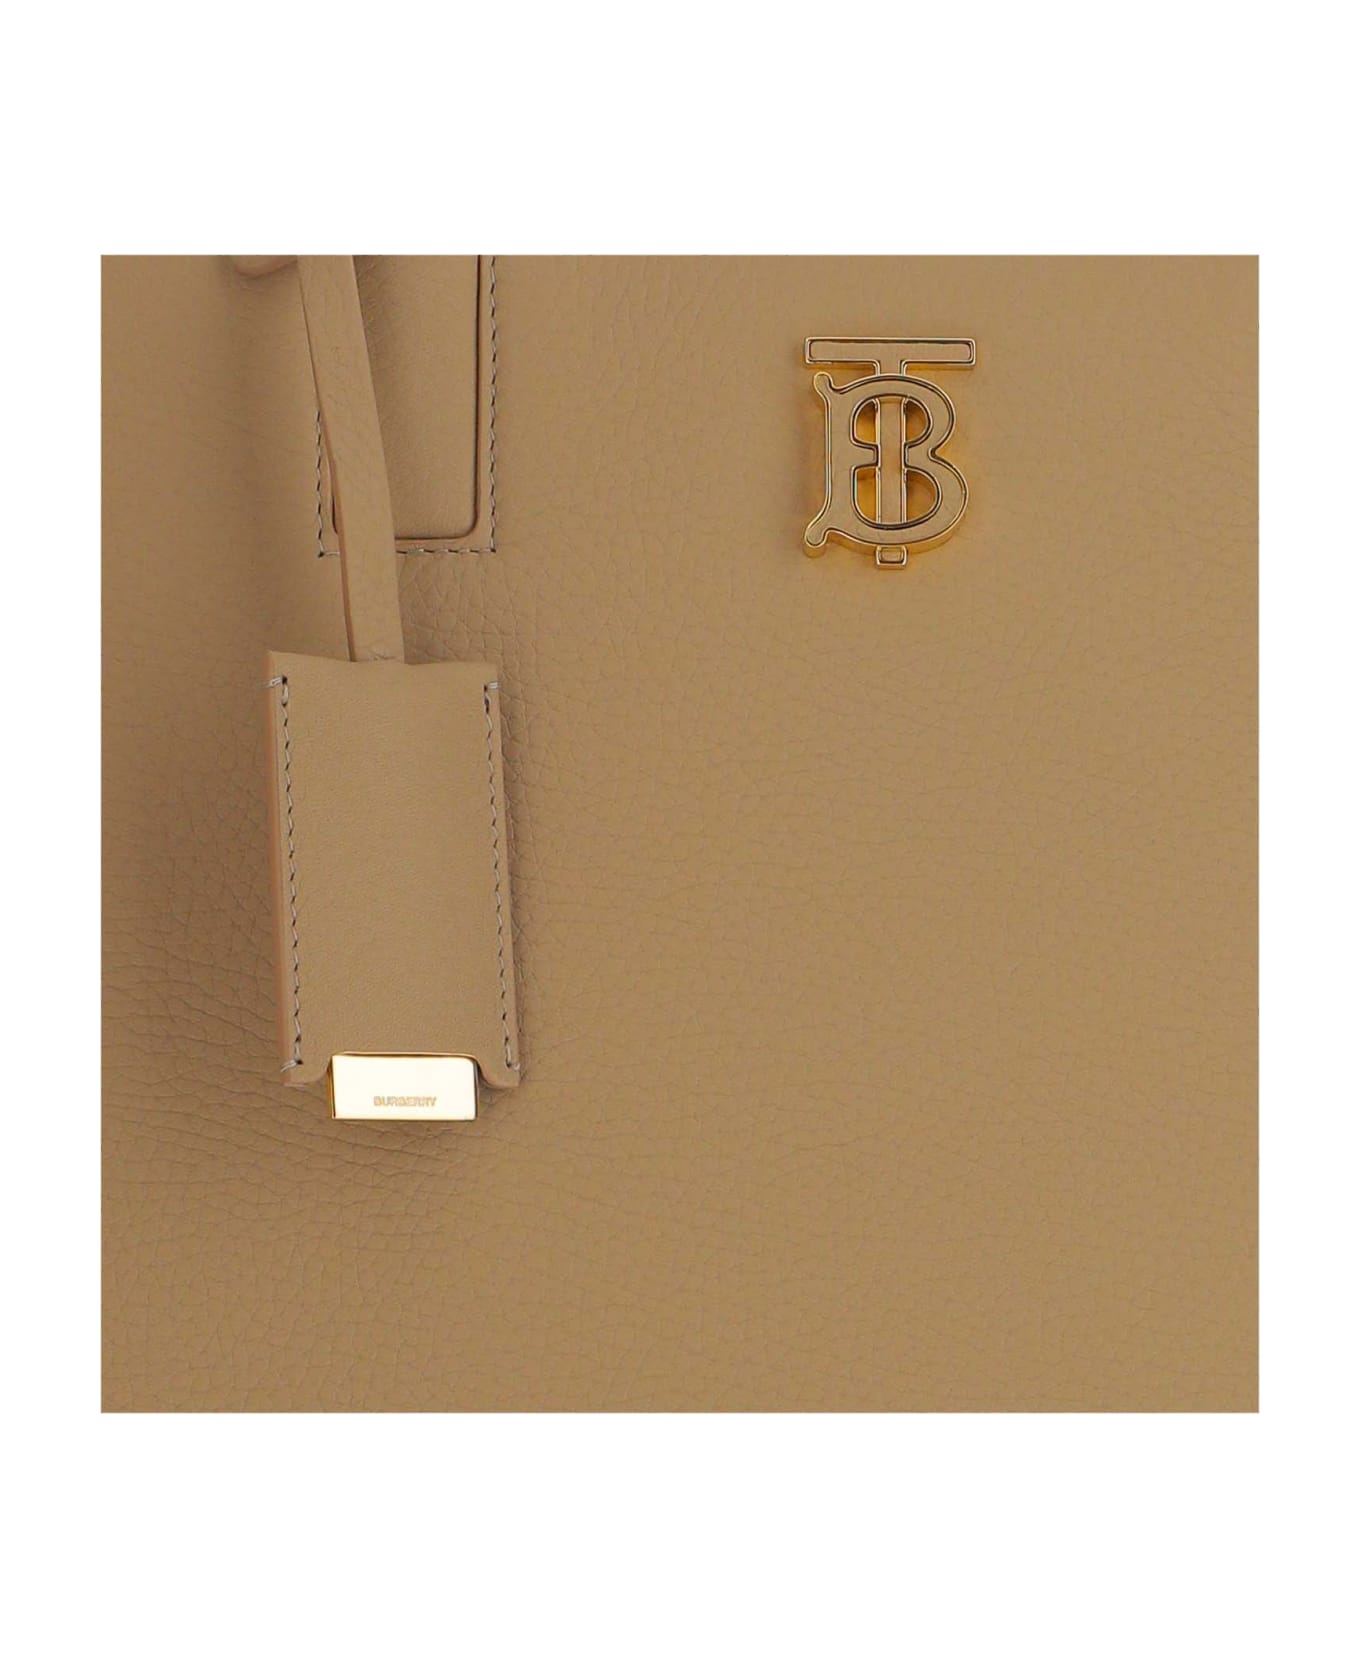 Burberry Frances Small Tote Bag - Beige